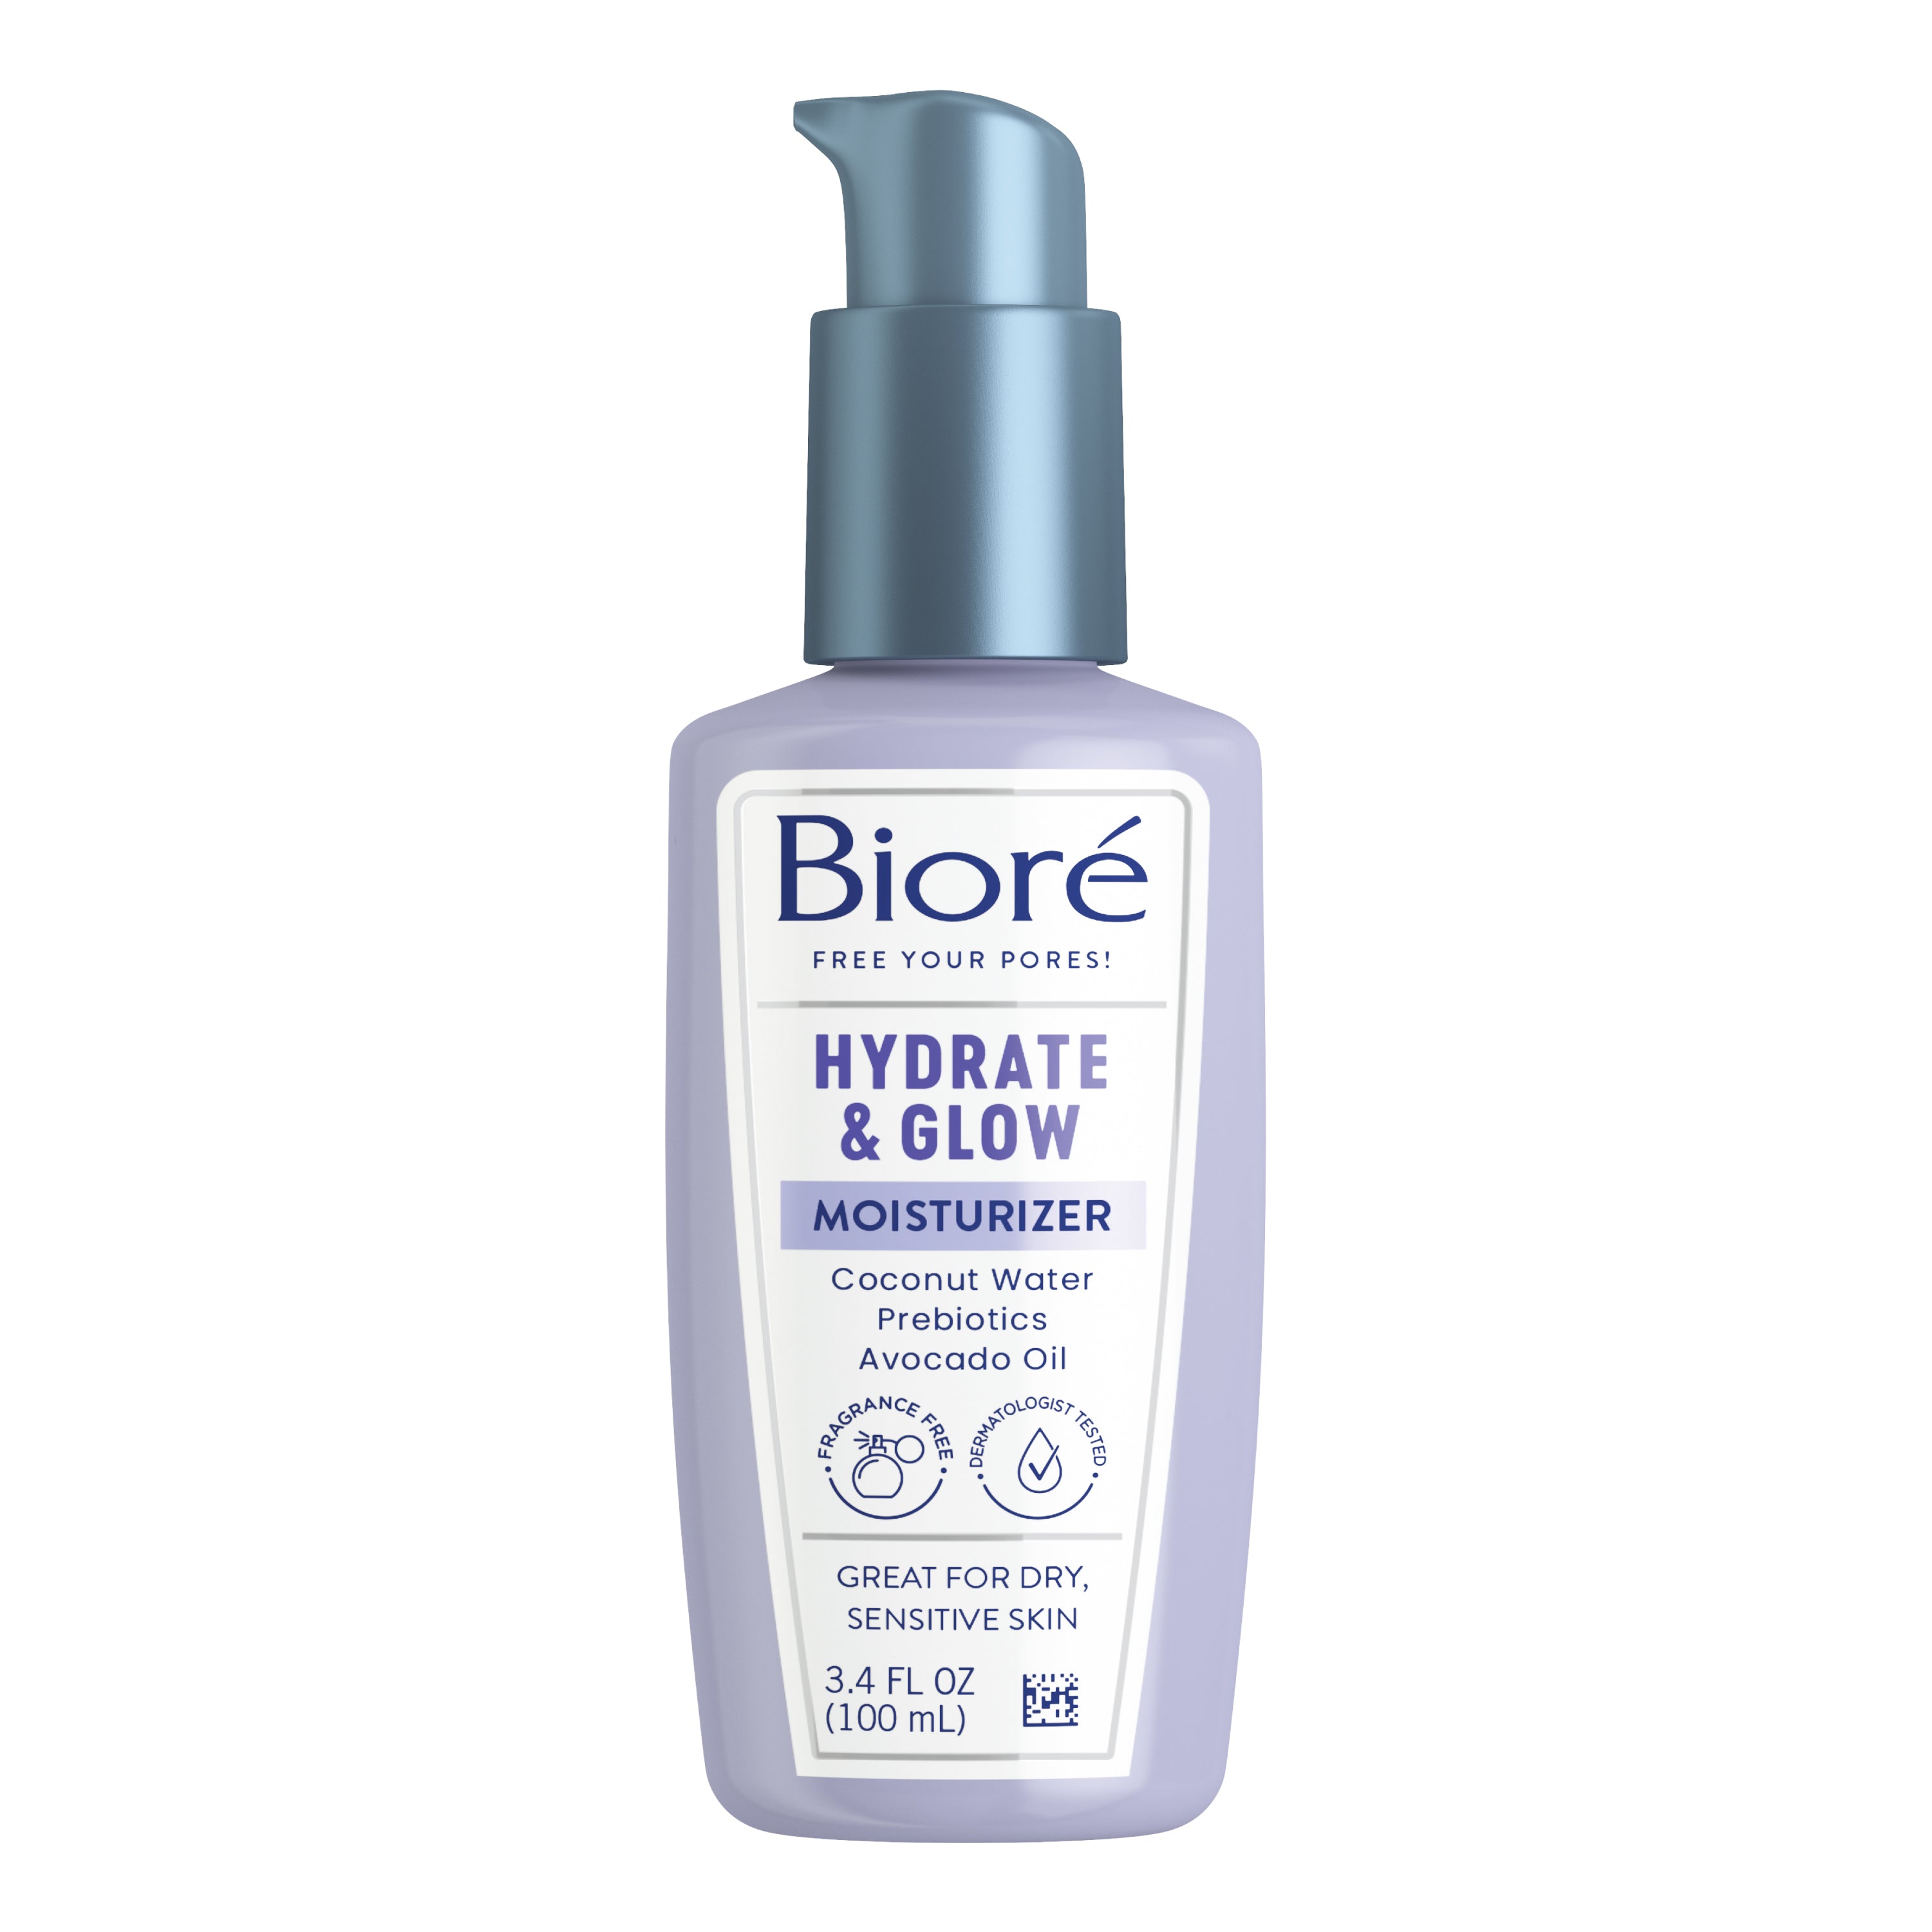 How to Brighten Your Skin: Top 10 Tips | Biore Skincare